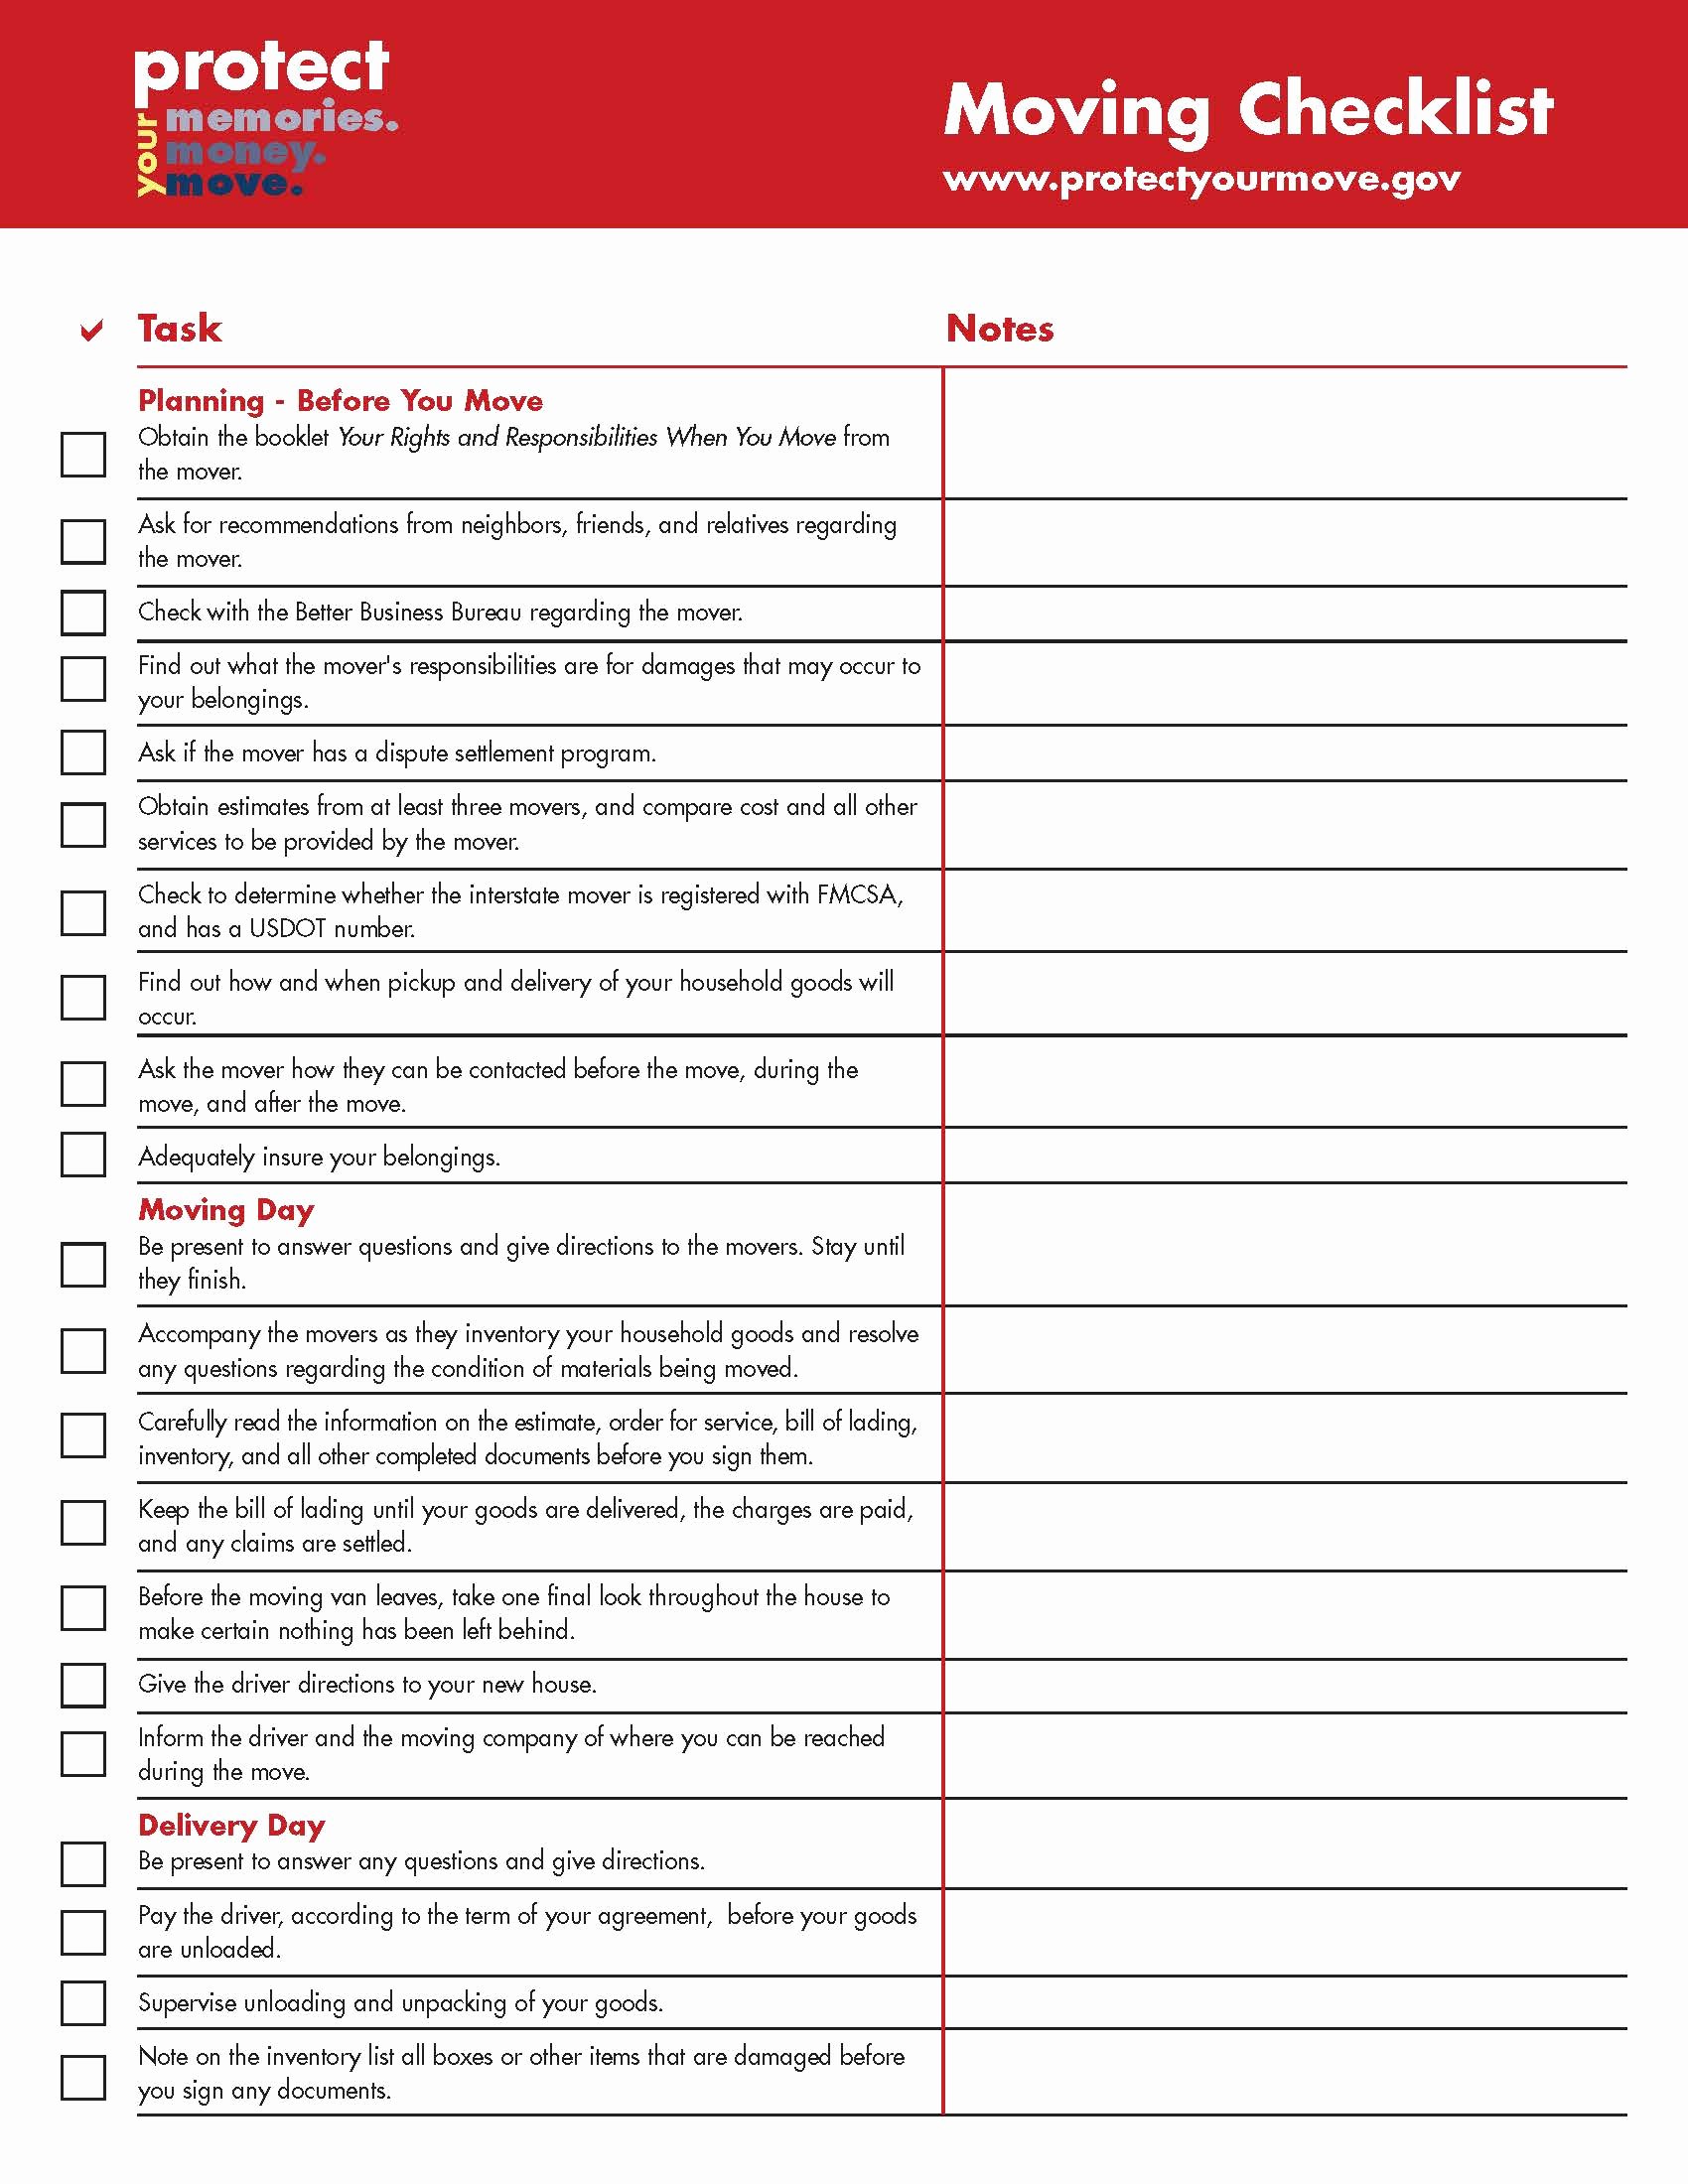 Moving Office Checklist Template Awesome Moving Checklist for Household Goods Interstate Moves